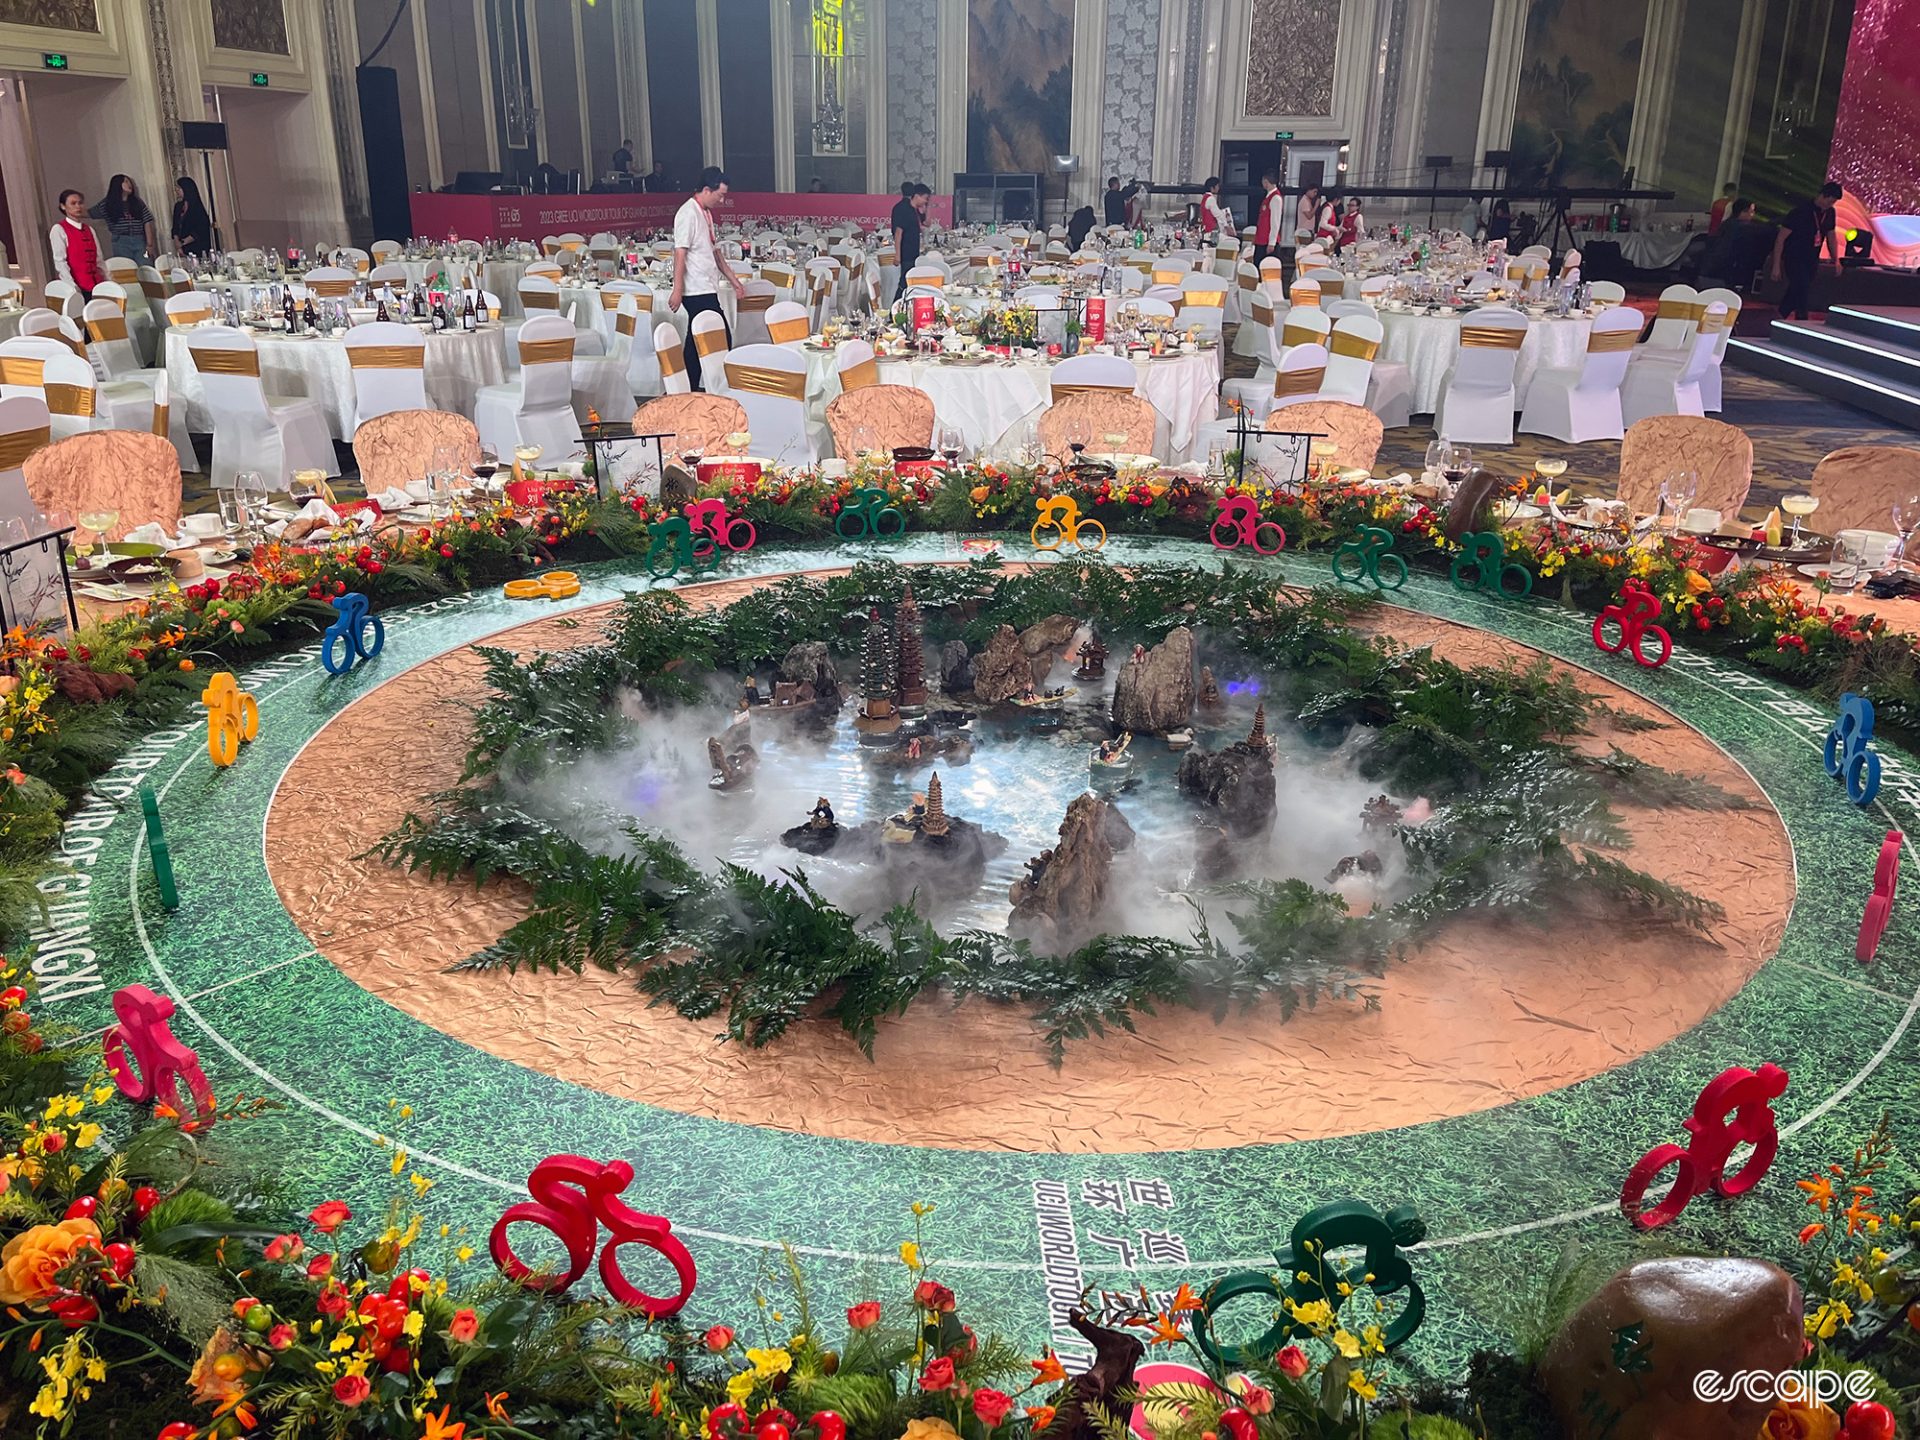 The top dinner table of the Tour of Guangxi featuring figurines in smoky water as the centrepiece.